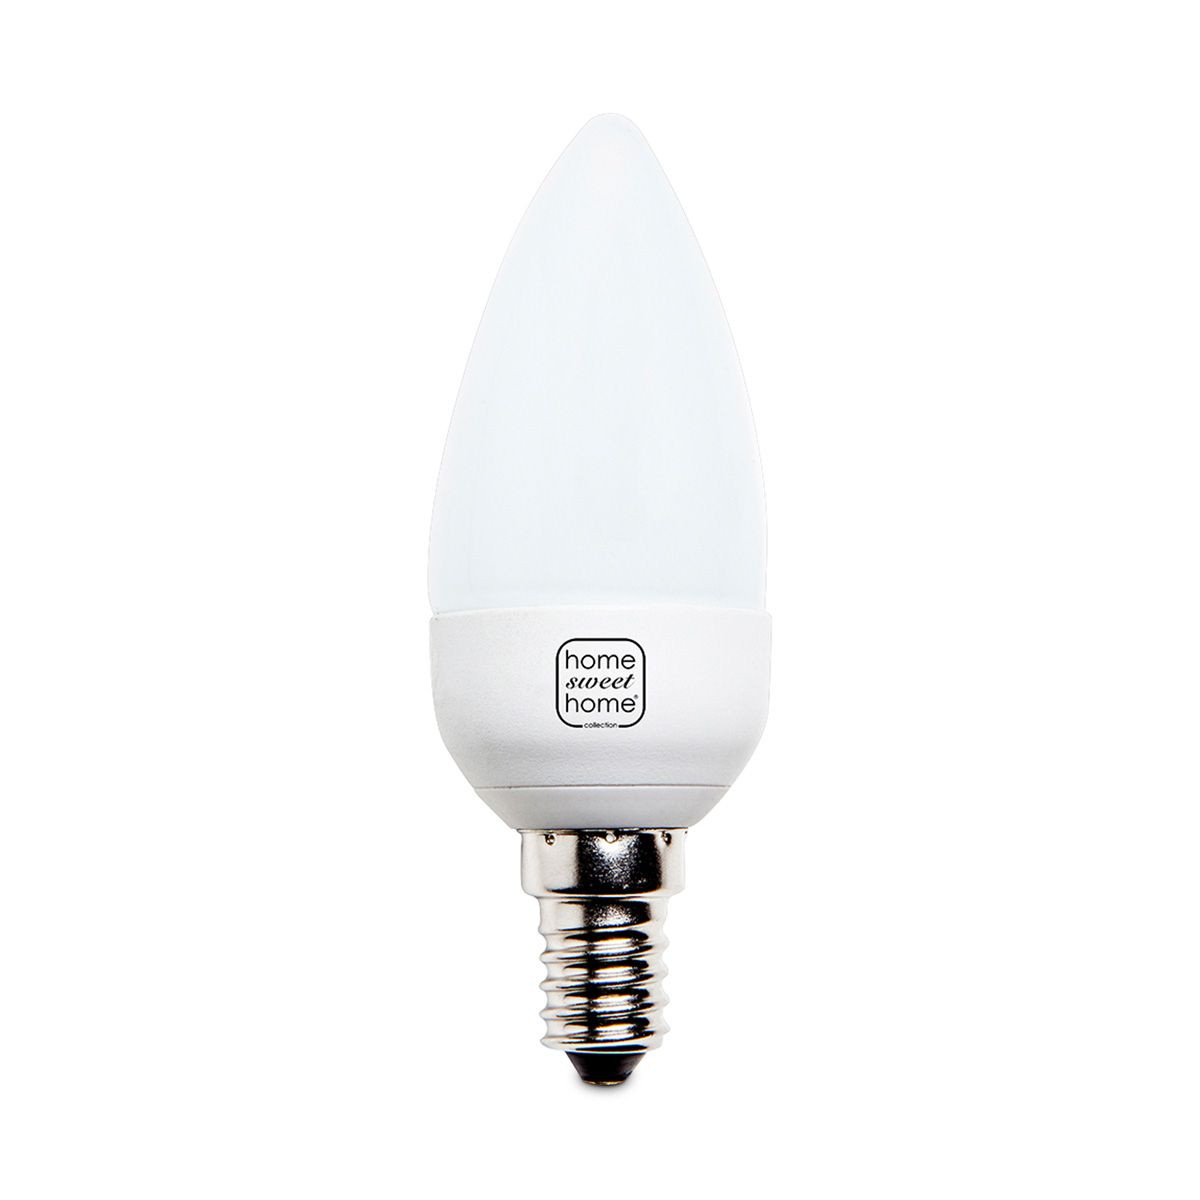 Light depot - LED lamp Candle E14 3,2W 250Lm 2700K - warmwit - Outlet